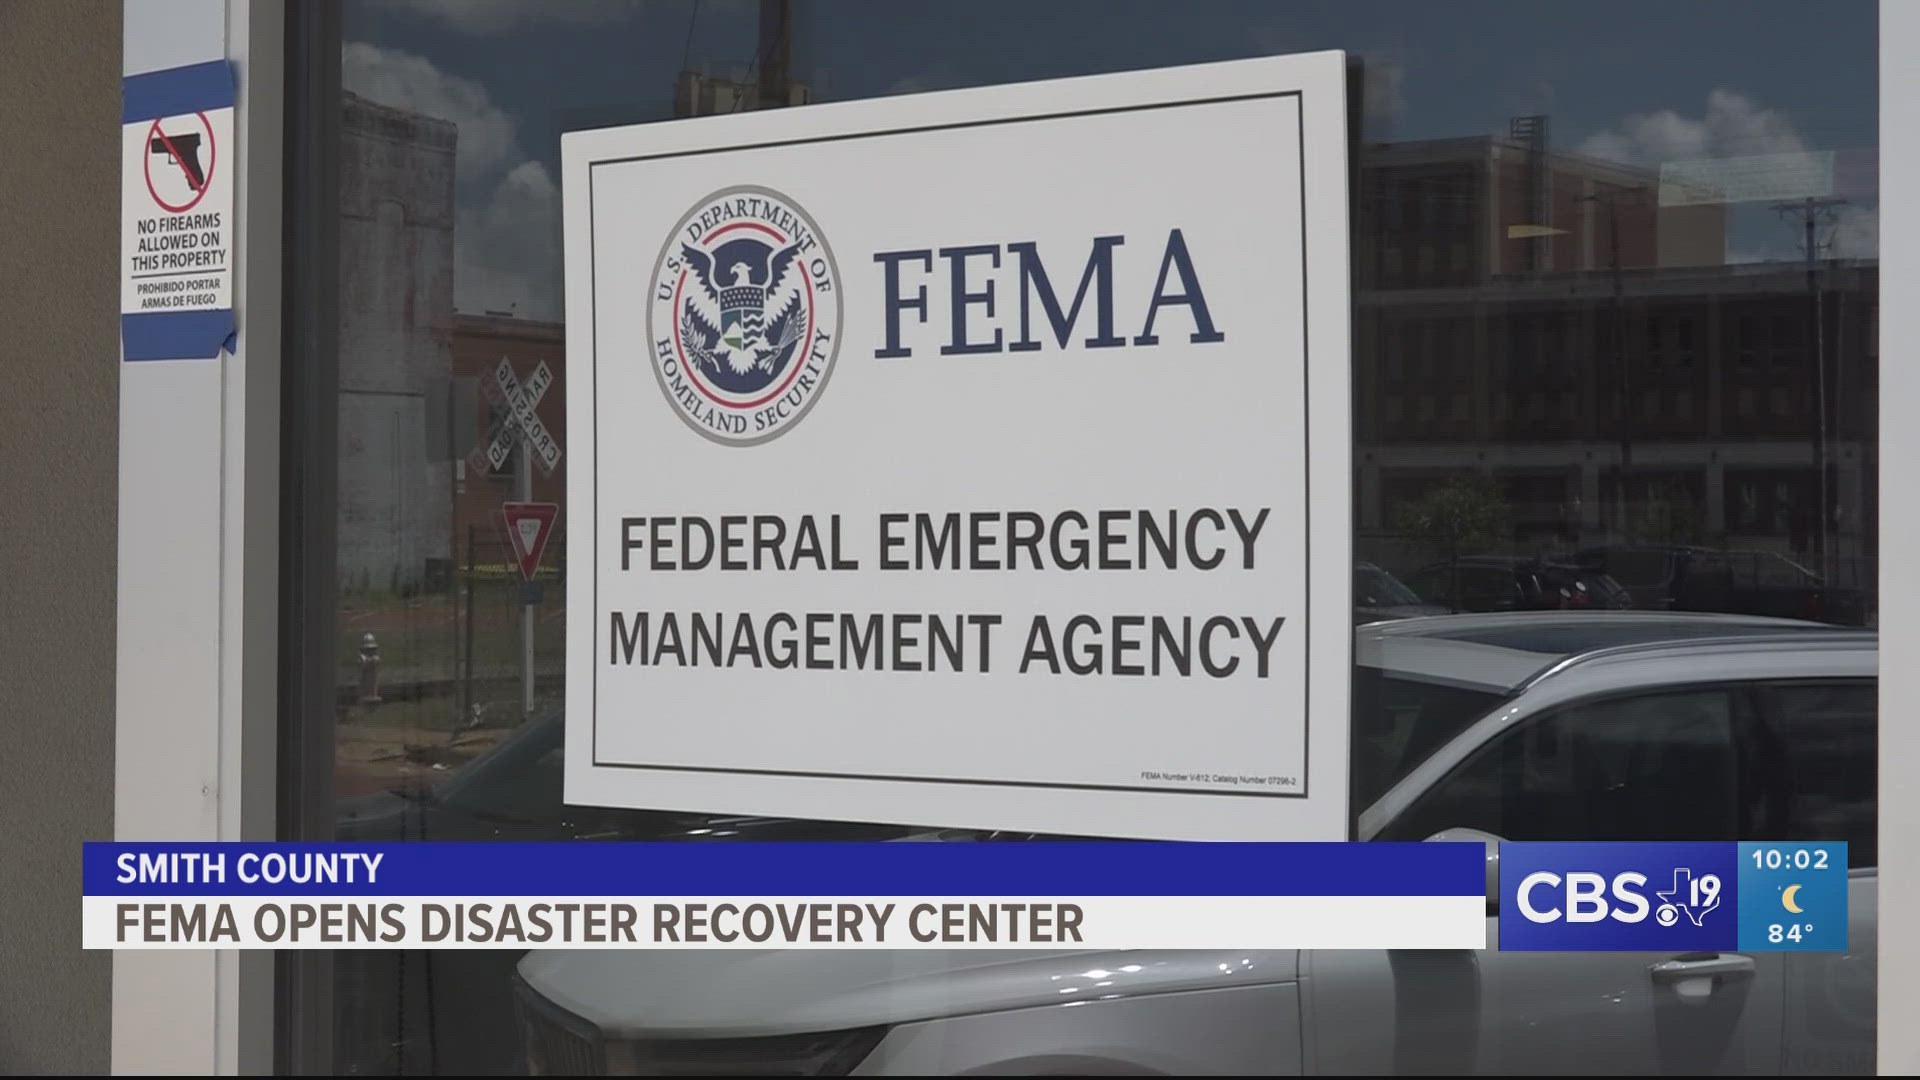 FEMA will open its disaster recovery center on Saturday, June 22. The center will be open from 7 a.m. to 7 p.m. daily.